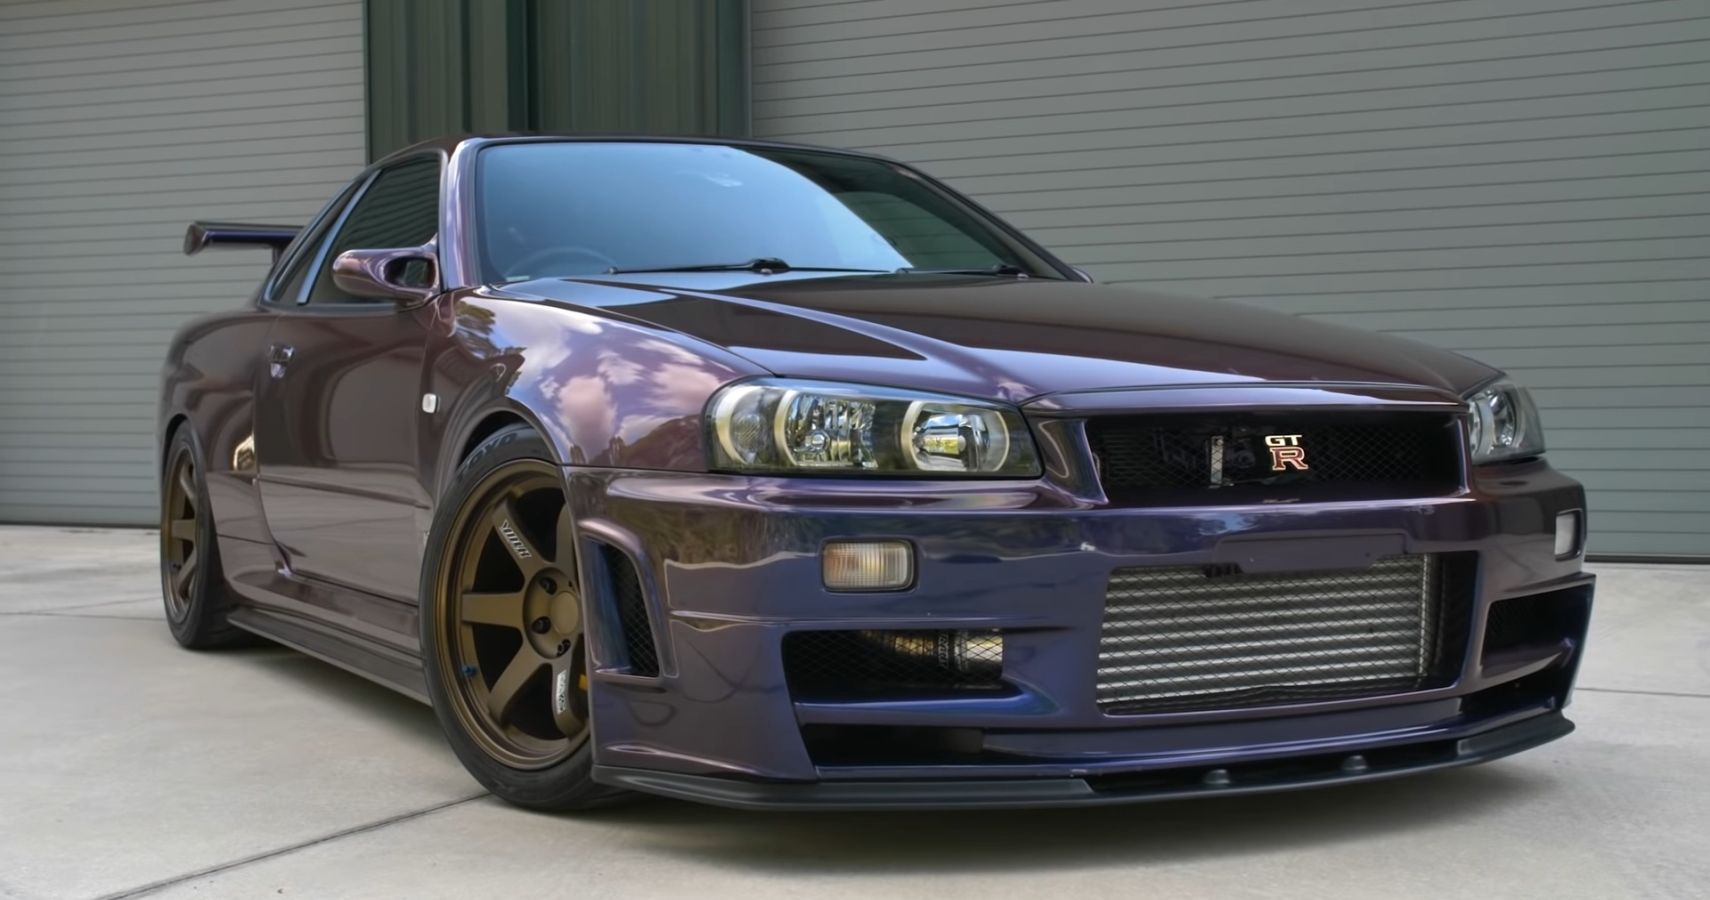 Adam LZ's Nissan Skyline R34 GTR: Inspired by the Fast and Furious  Franchise